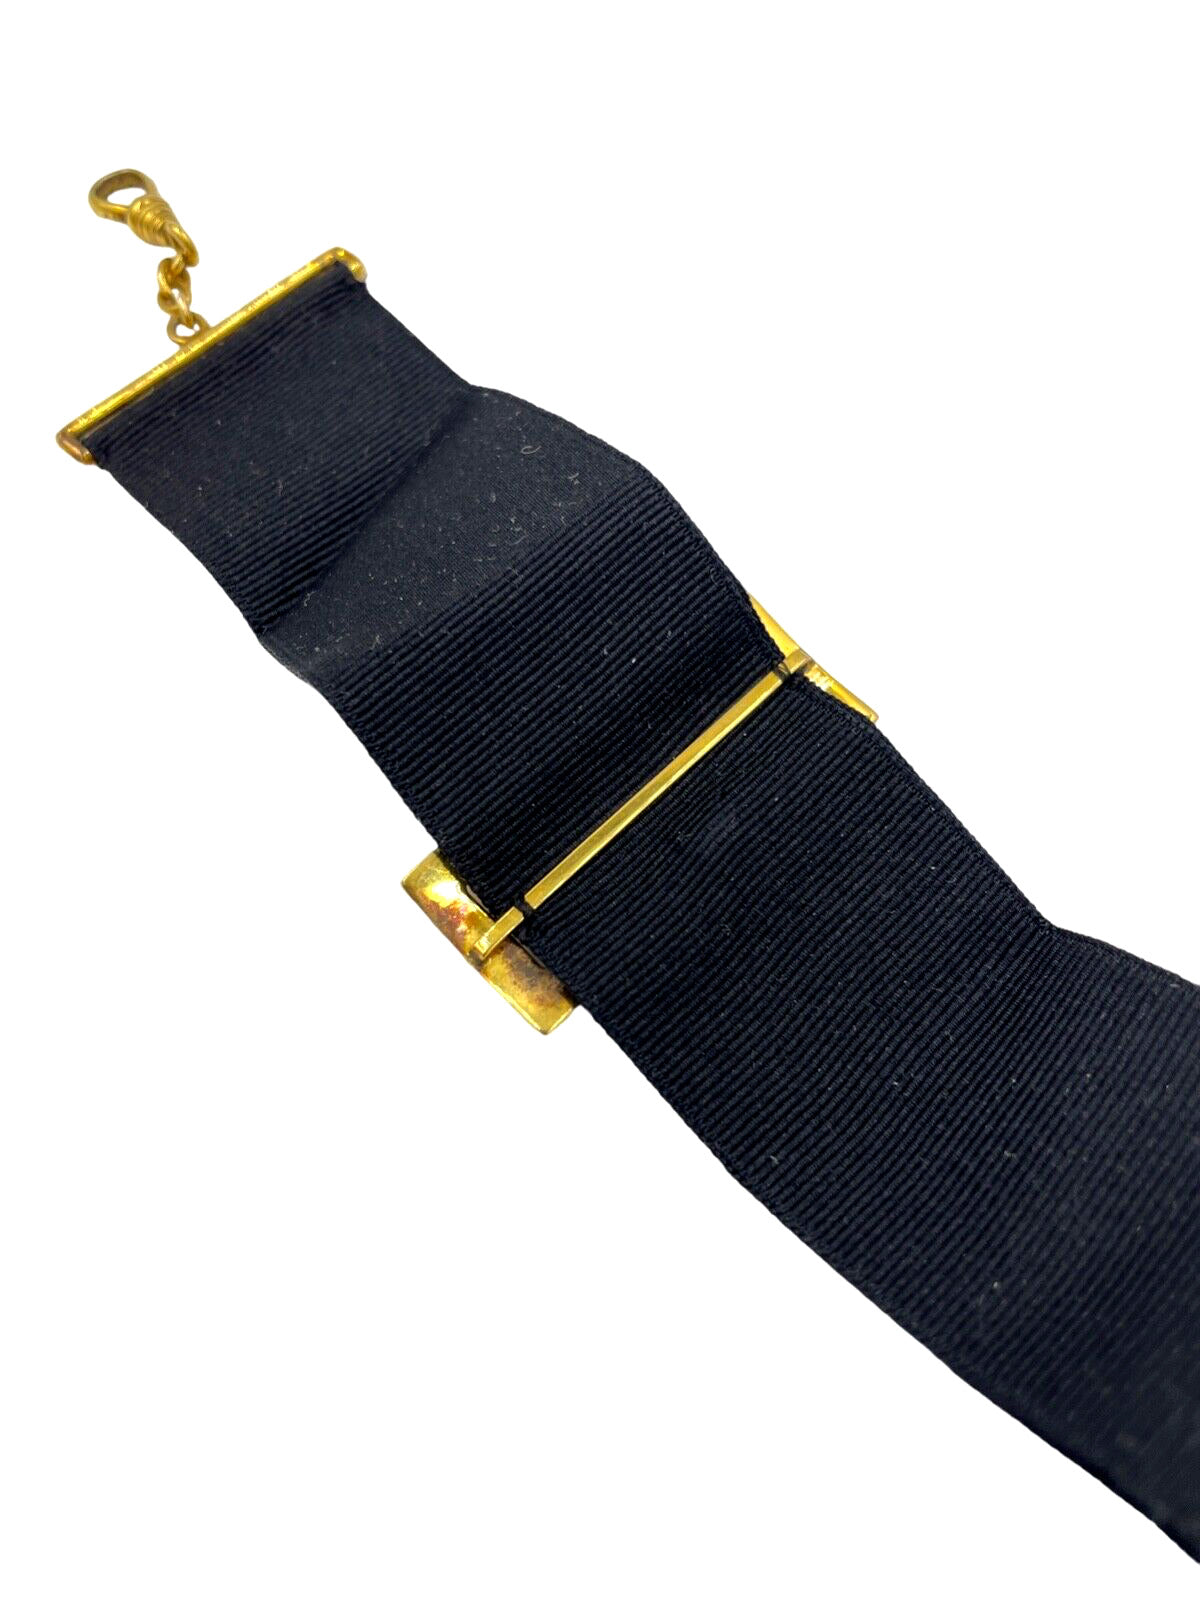 Antique 10K GOLD & BLACK SILK RIBBON WATCH CHAIN FOB Mourning